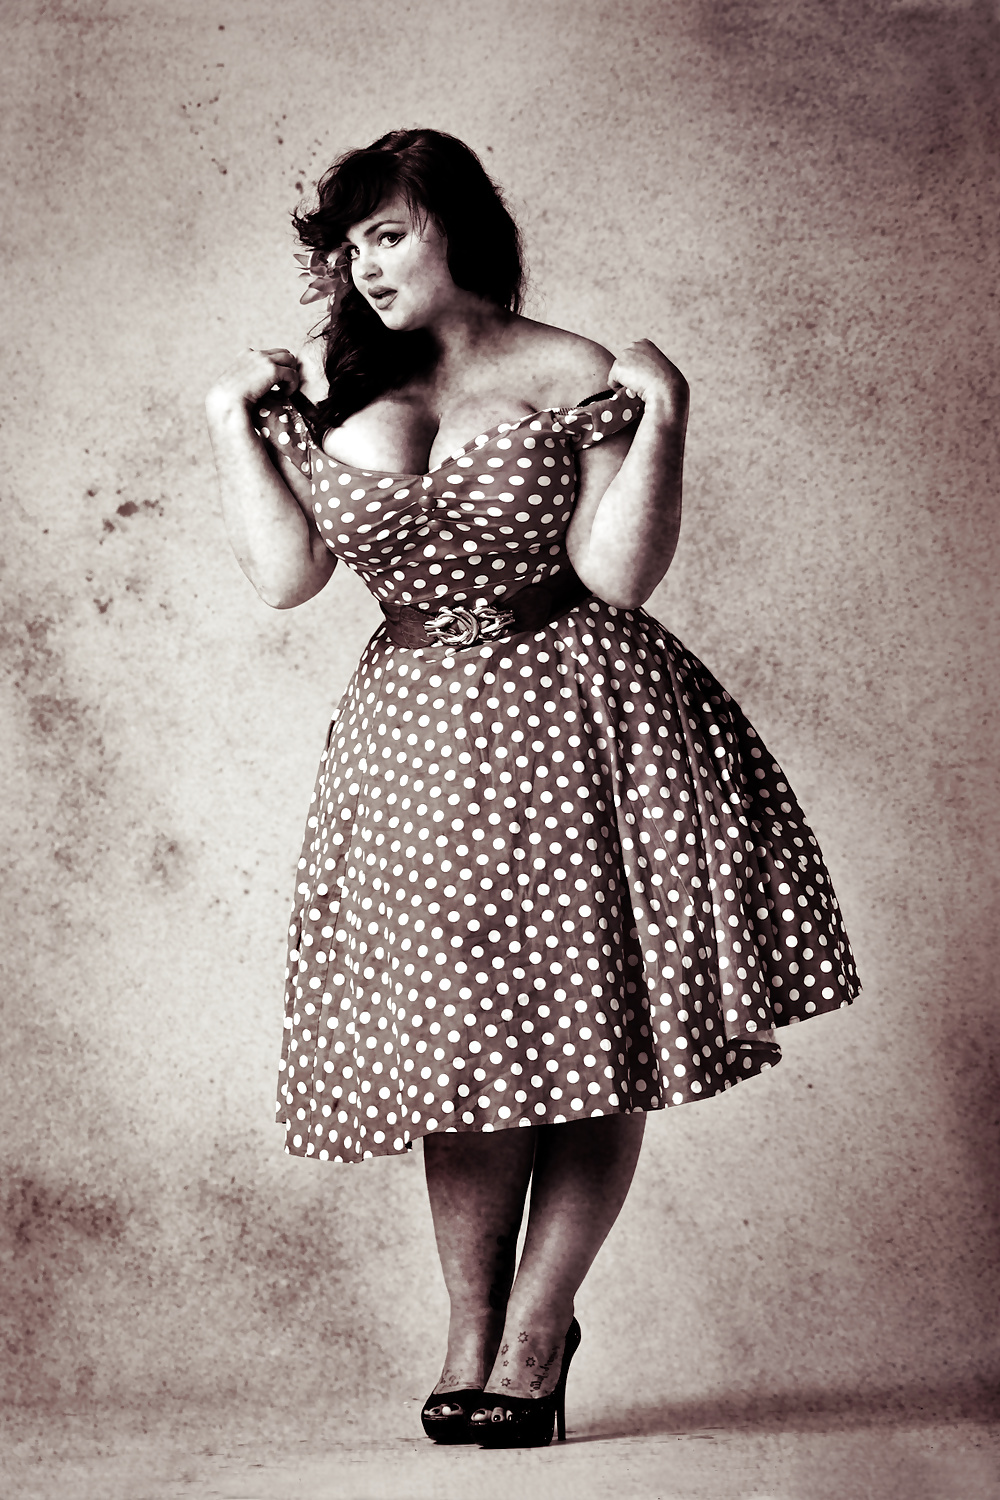 Plus Size Pin-Up Models #35235503